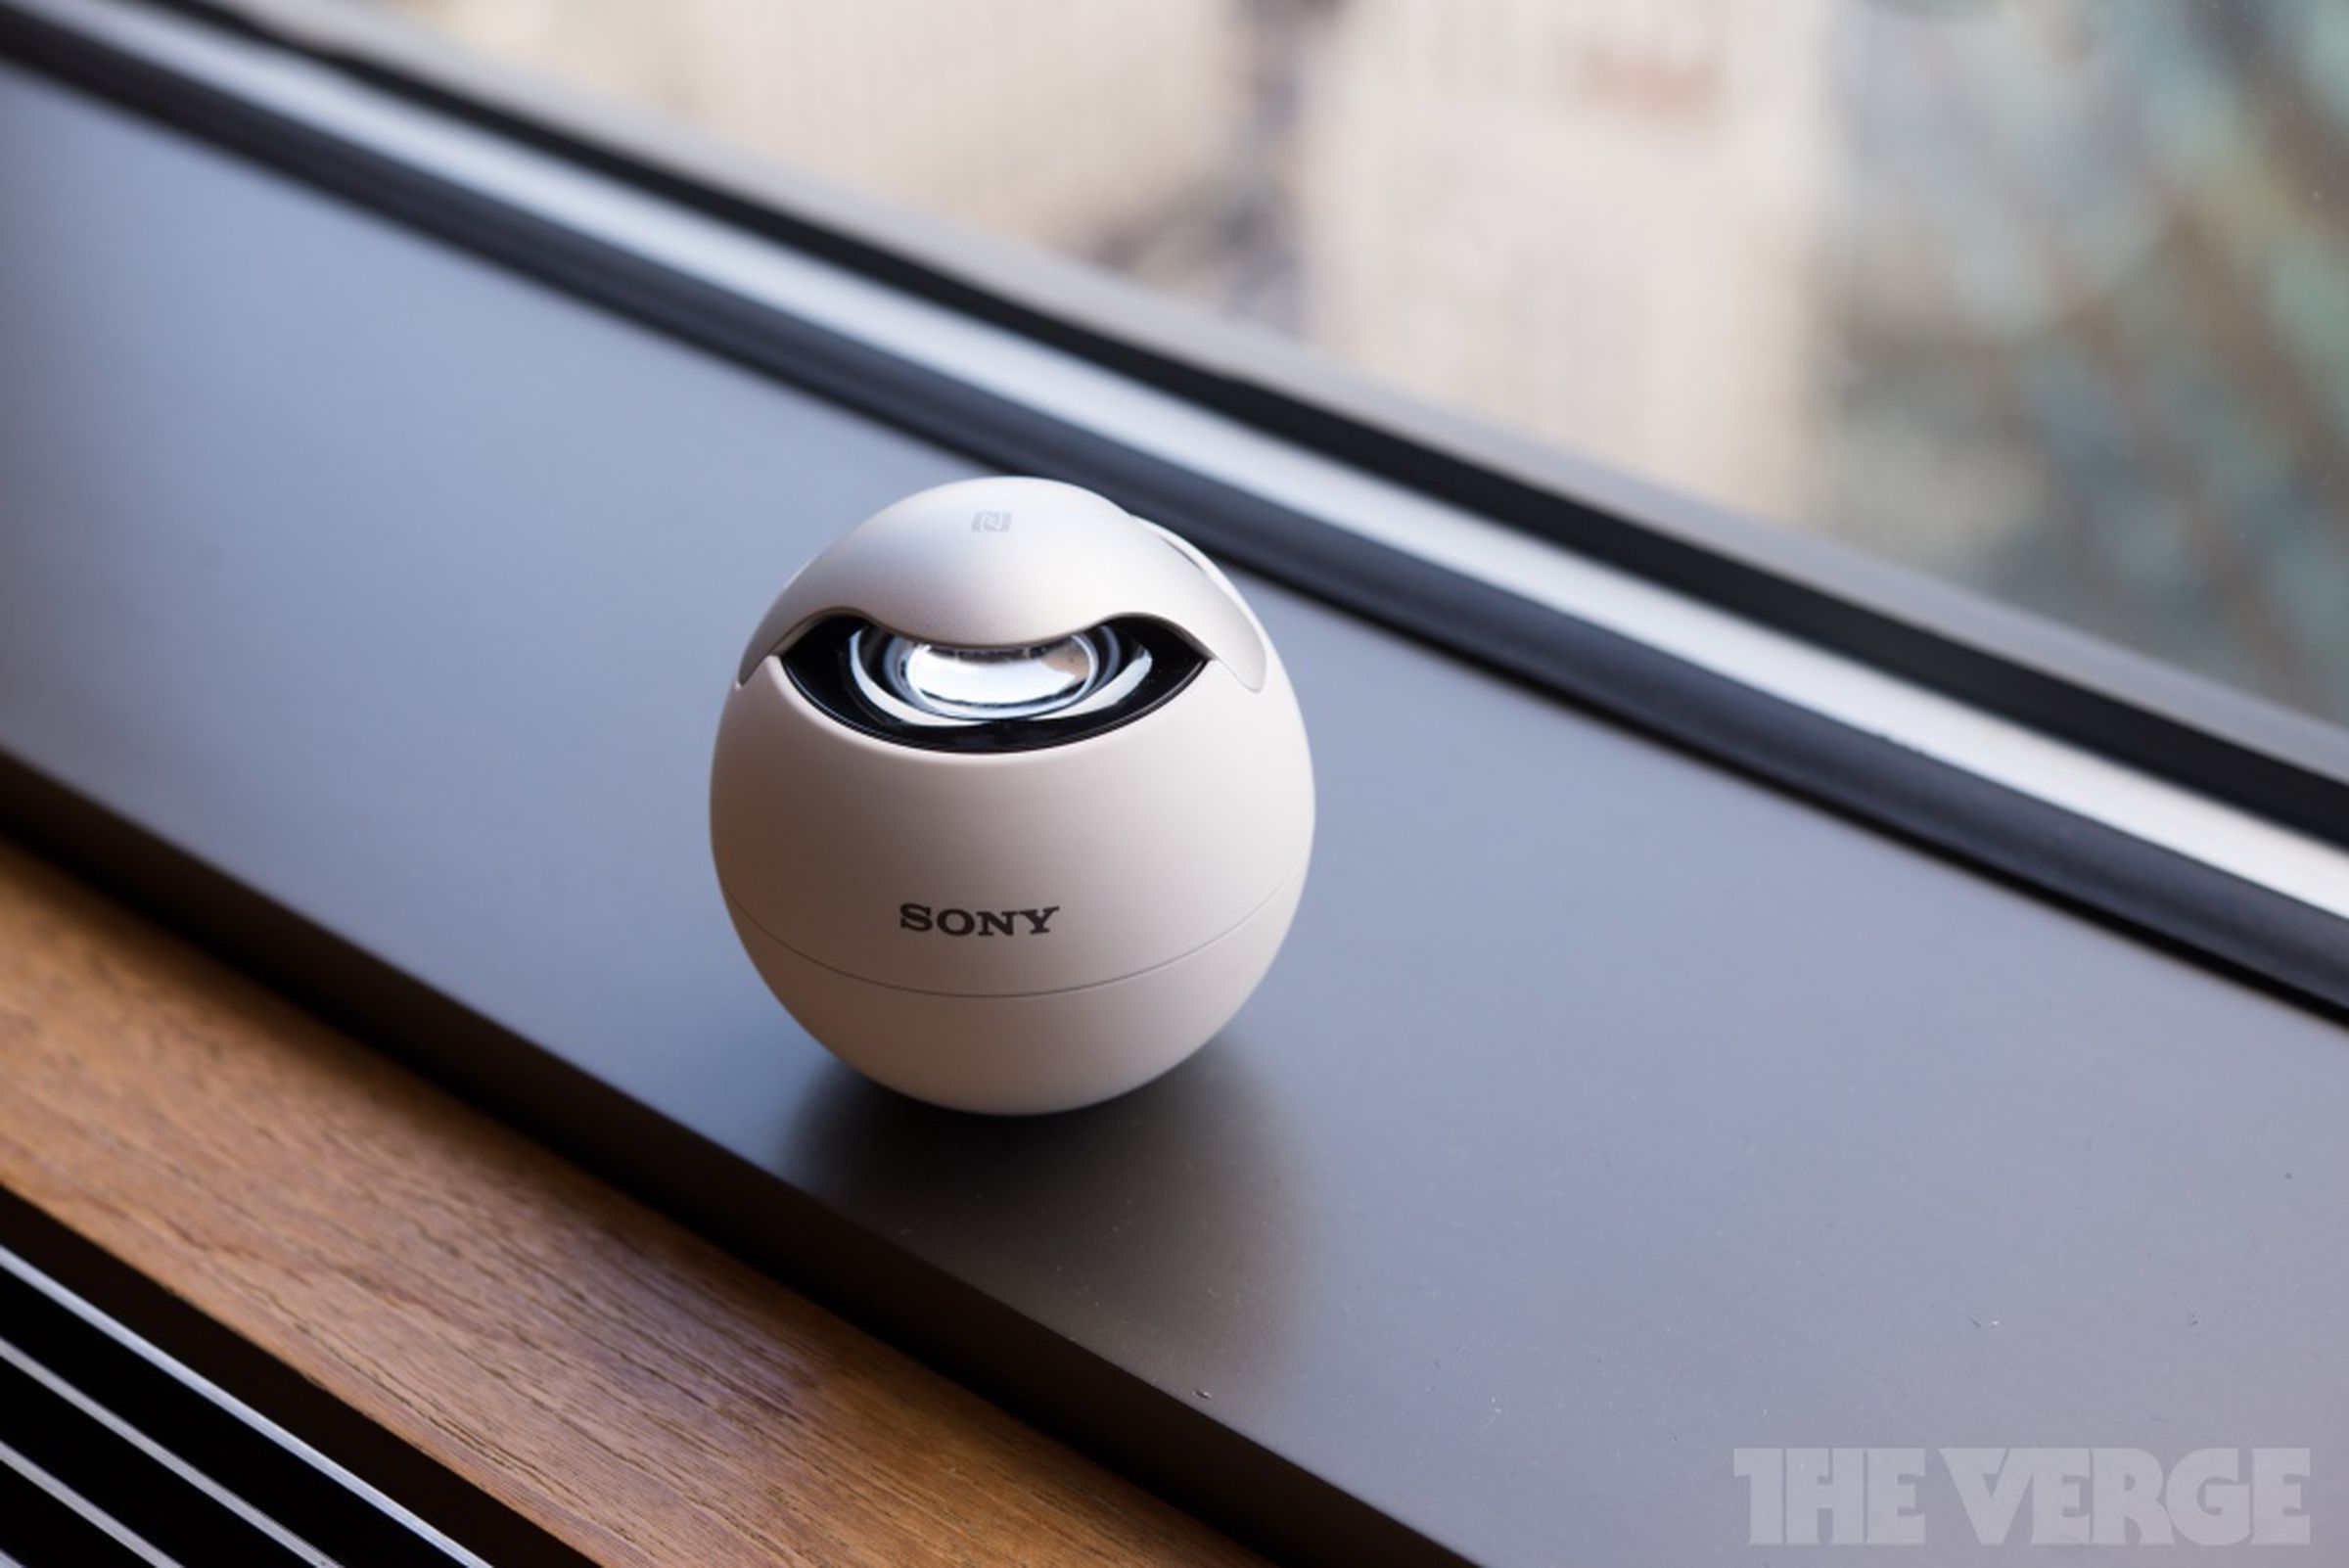 Sony Bluetooth and NFC wireless speakers